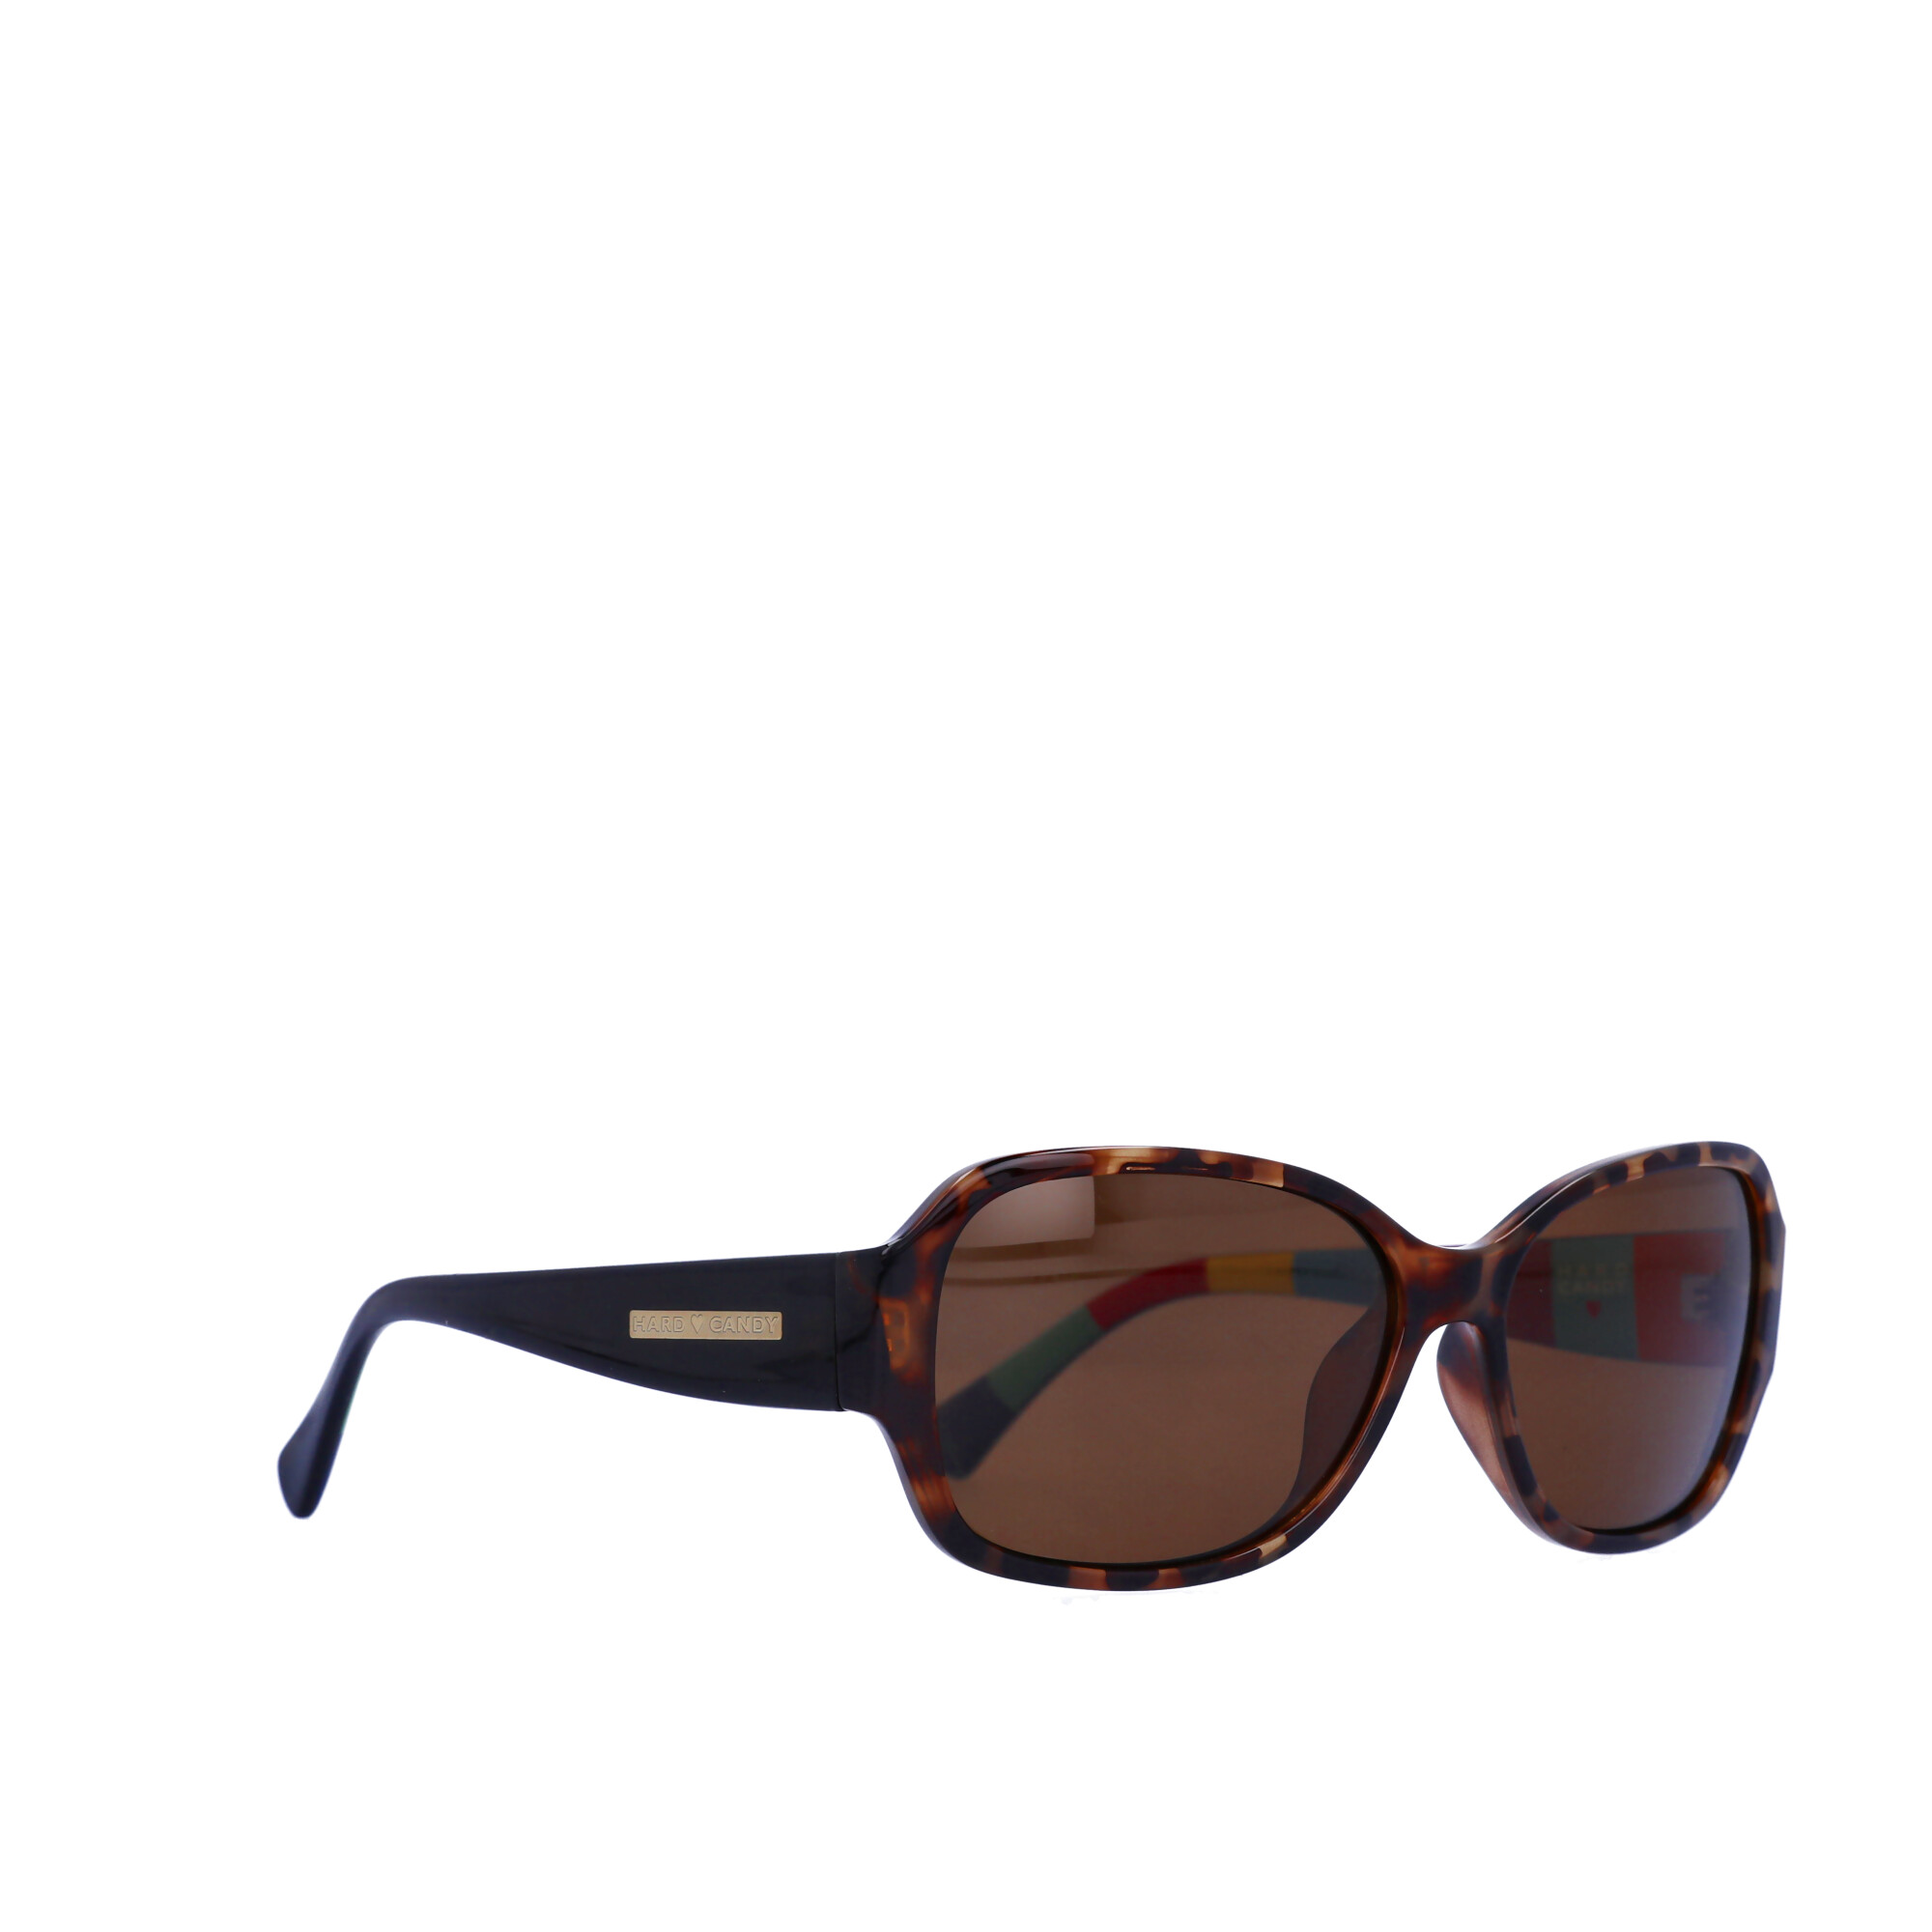 Hard Candy Womens Rx'able Sunglasses, Hs14, Tortoise Patterned, 57-15-138, with Case - image 2 of 13